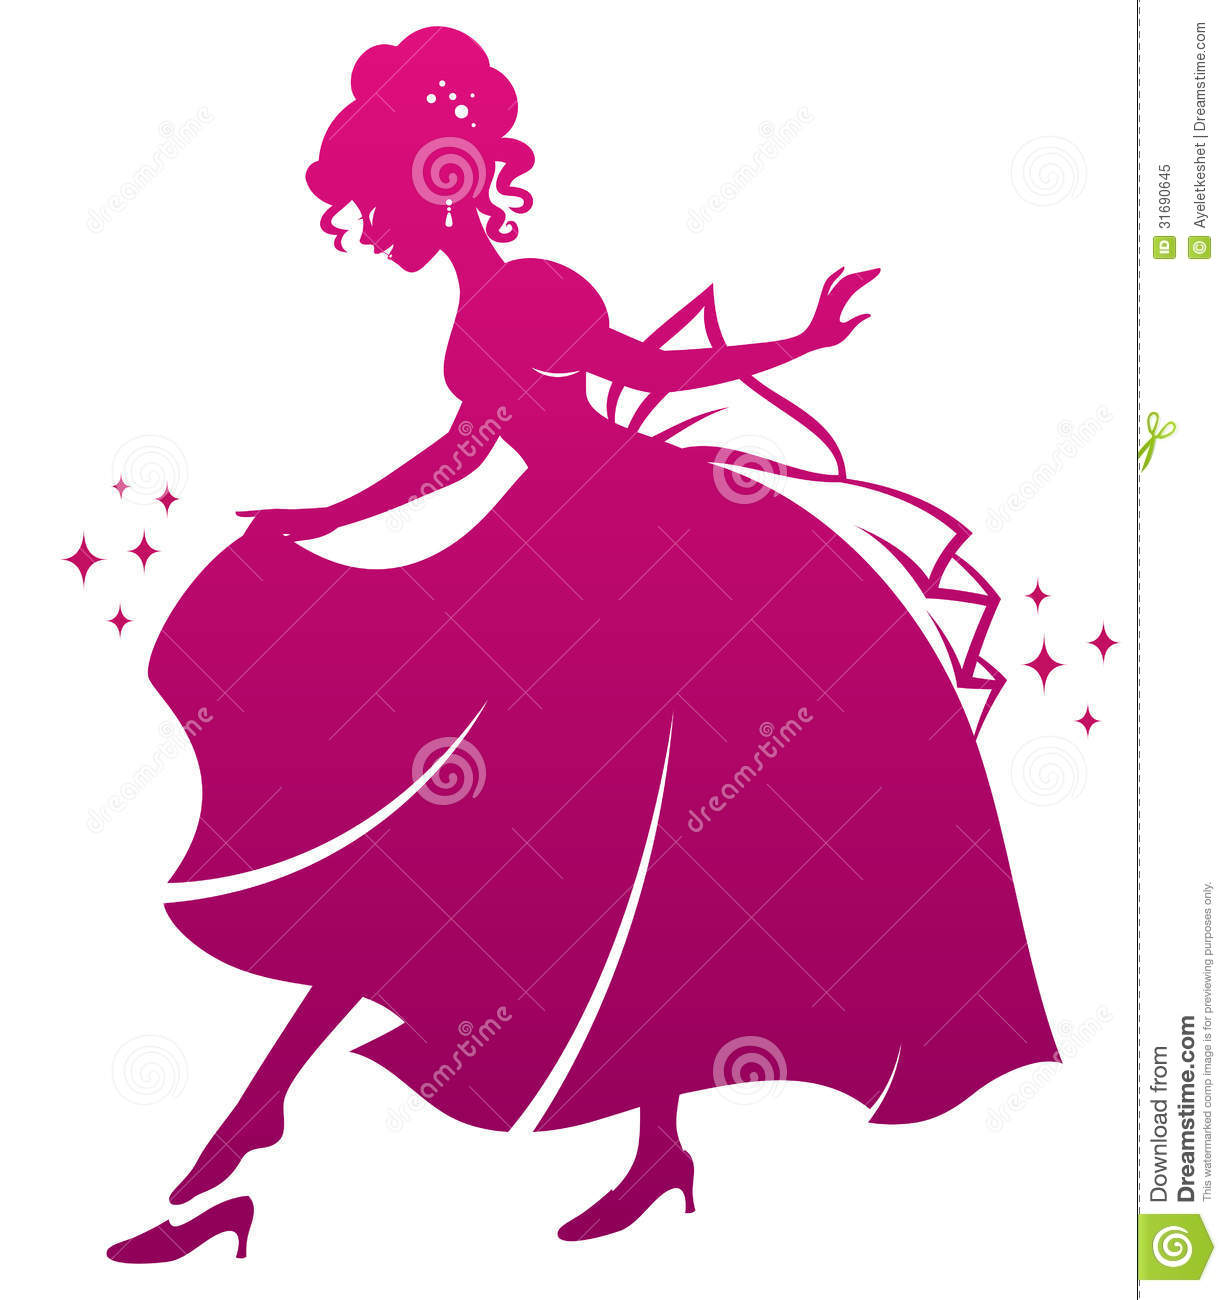 Princess And Her Shoe Royalty Free Stock Photo   Image  31690645